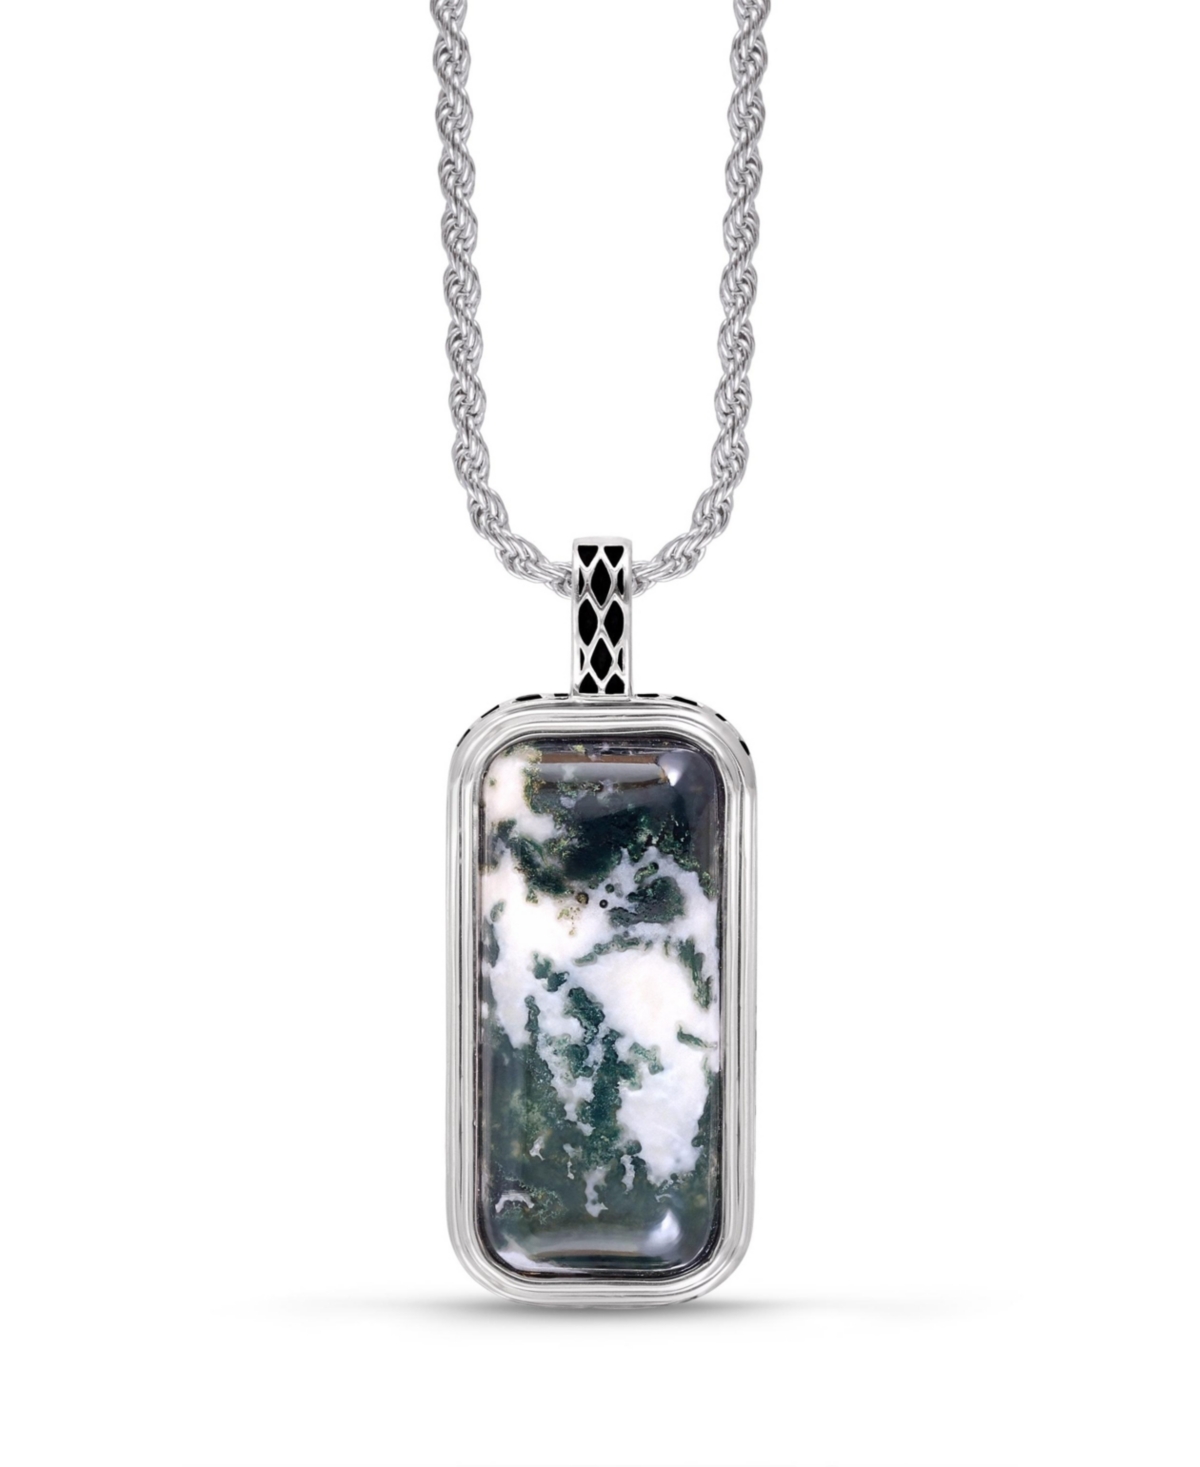 Tree Agate Gemstone Sterling Silver Men Tag in Black Rhodium Plated with Chain - White